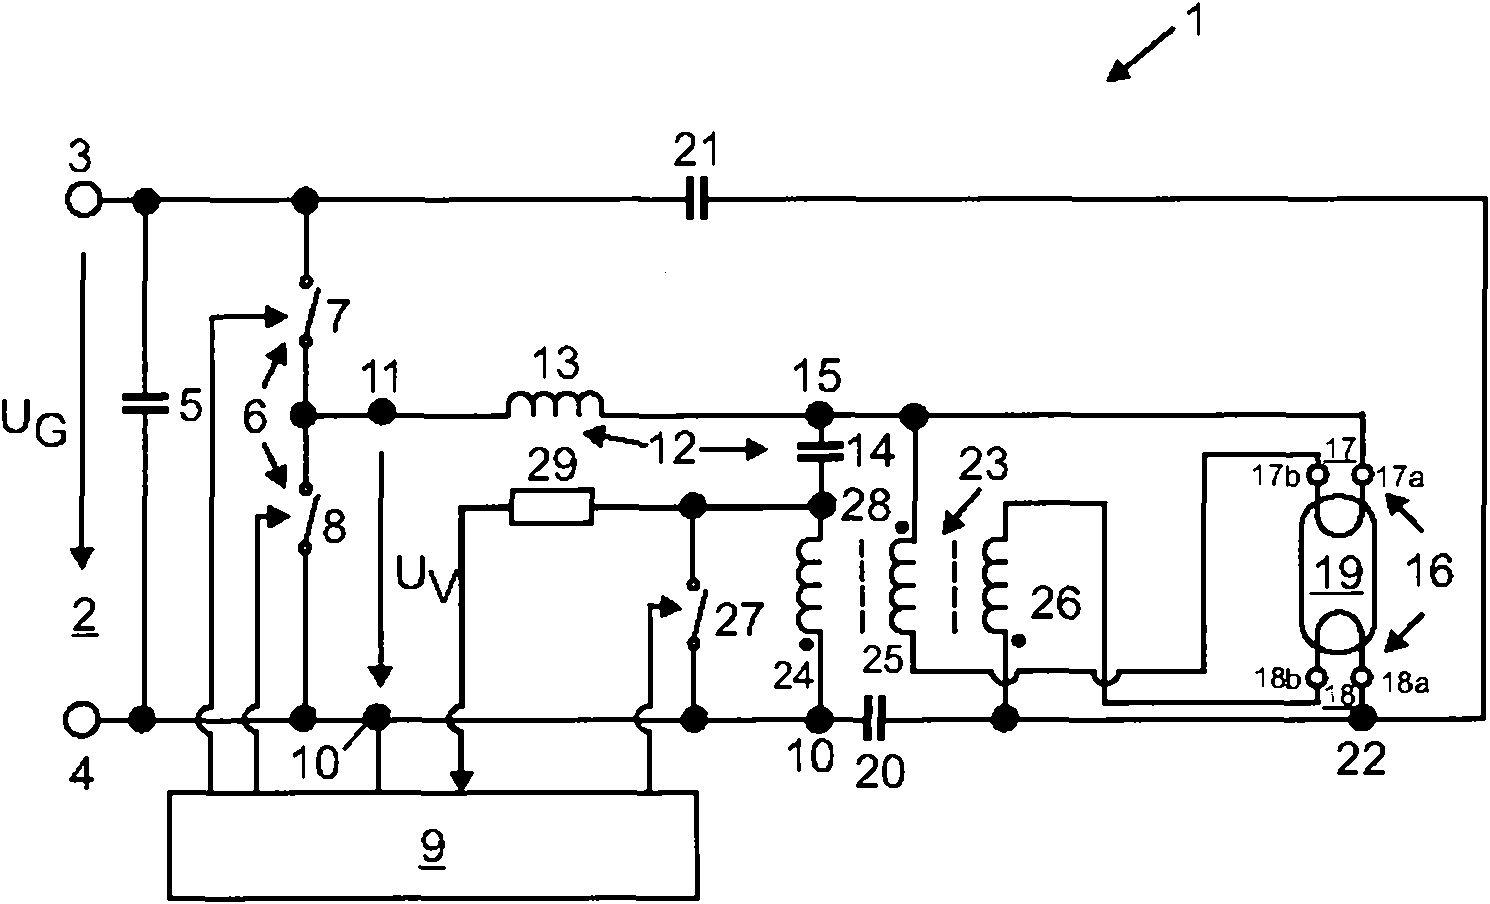 Circuit arrangement for operating a low-pressure gas discharge lamp and corresponding method